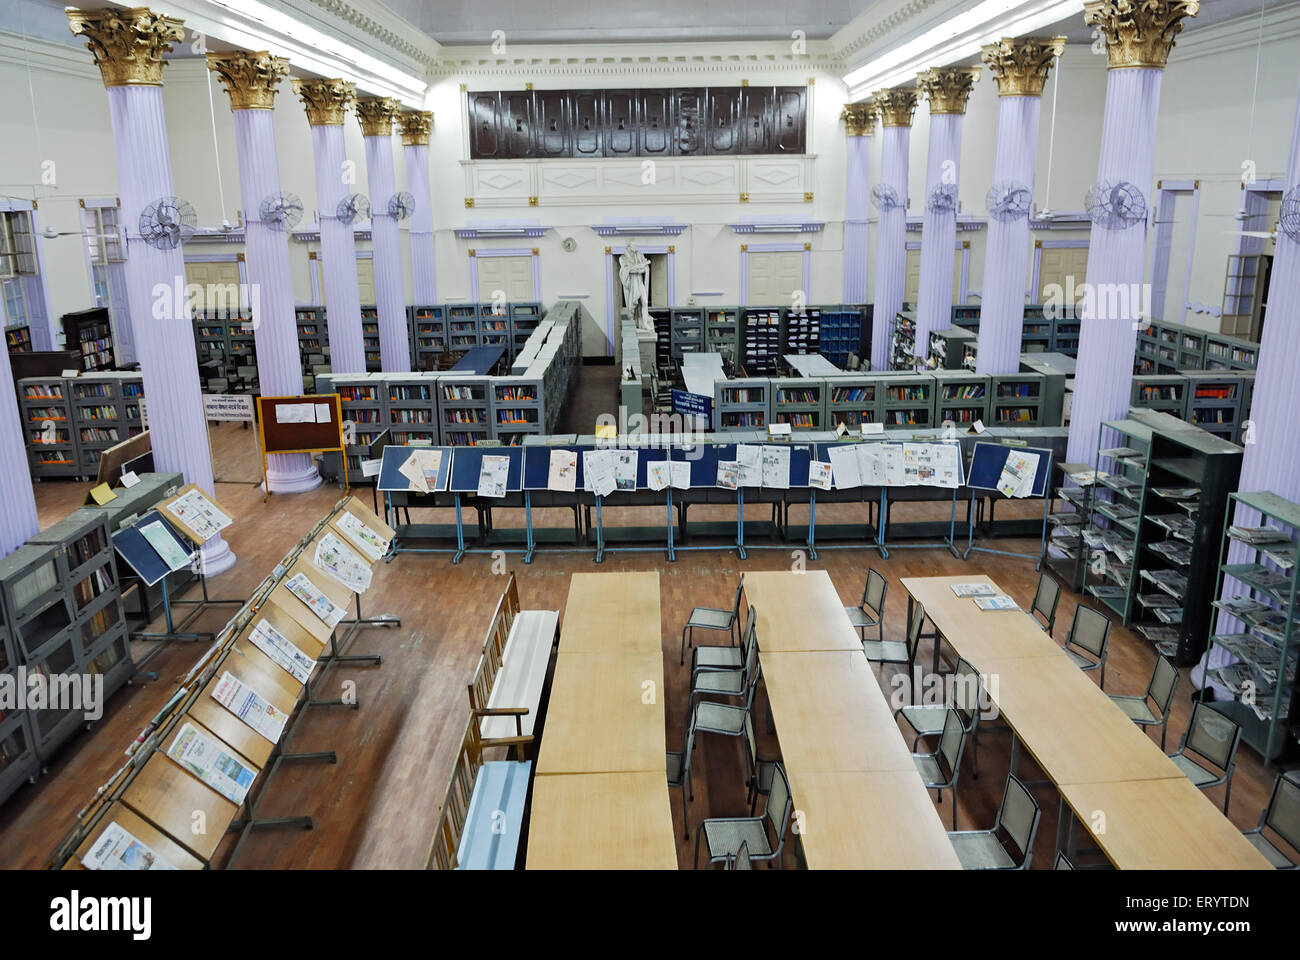 Newspaper stand and book shelves in town hall asiatic library Bombay Mumbai ; Maharashtra ; India Stock Photo